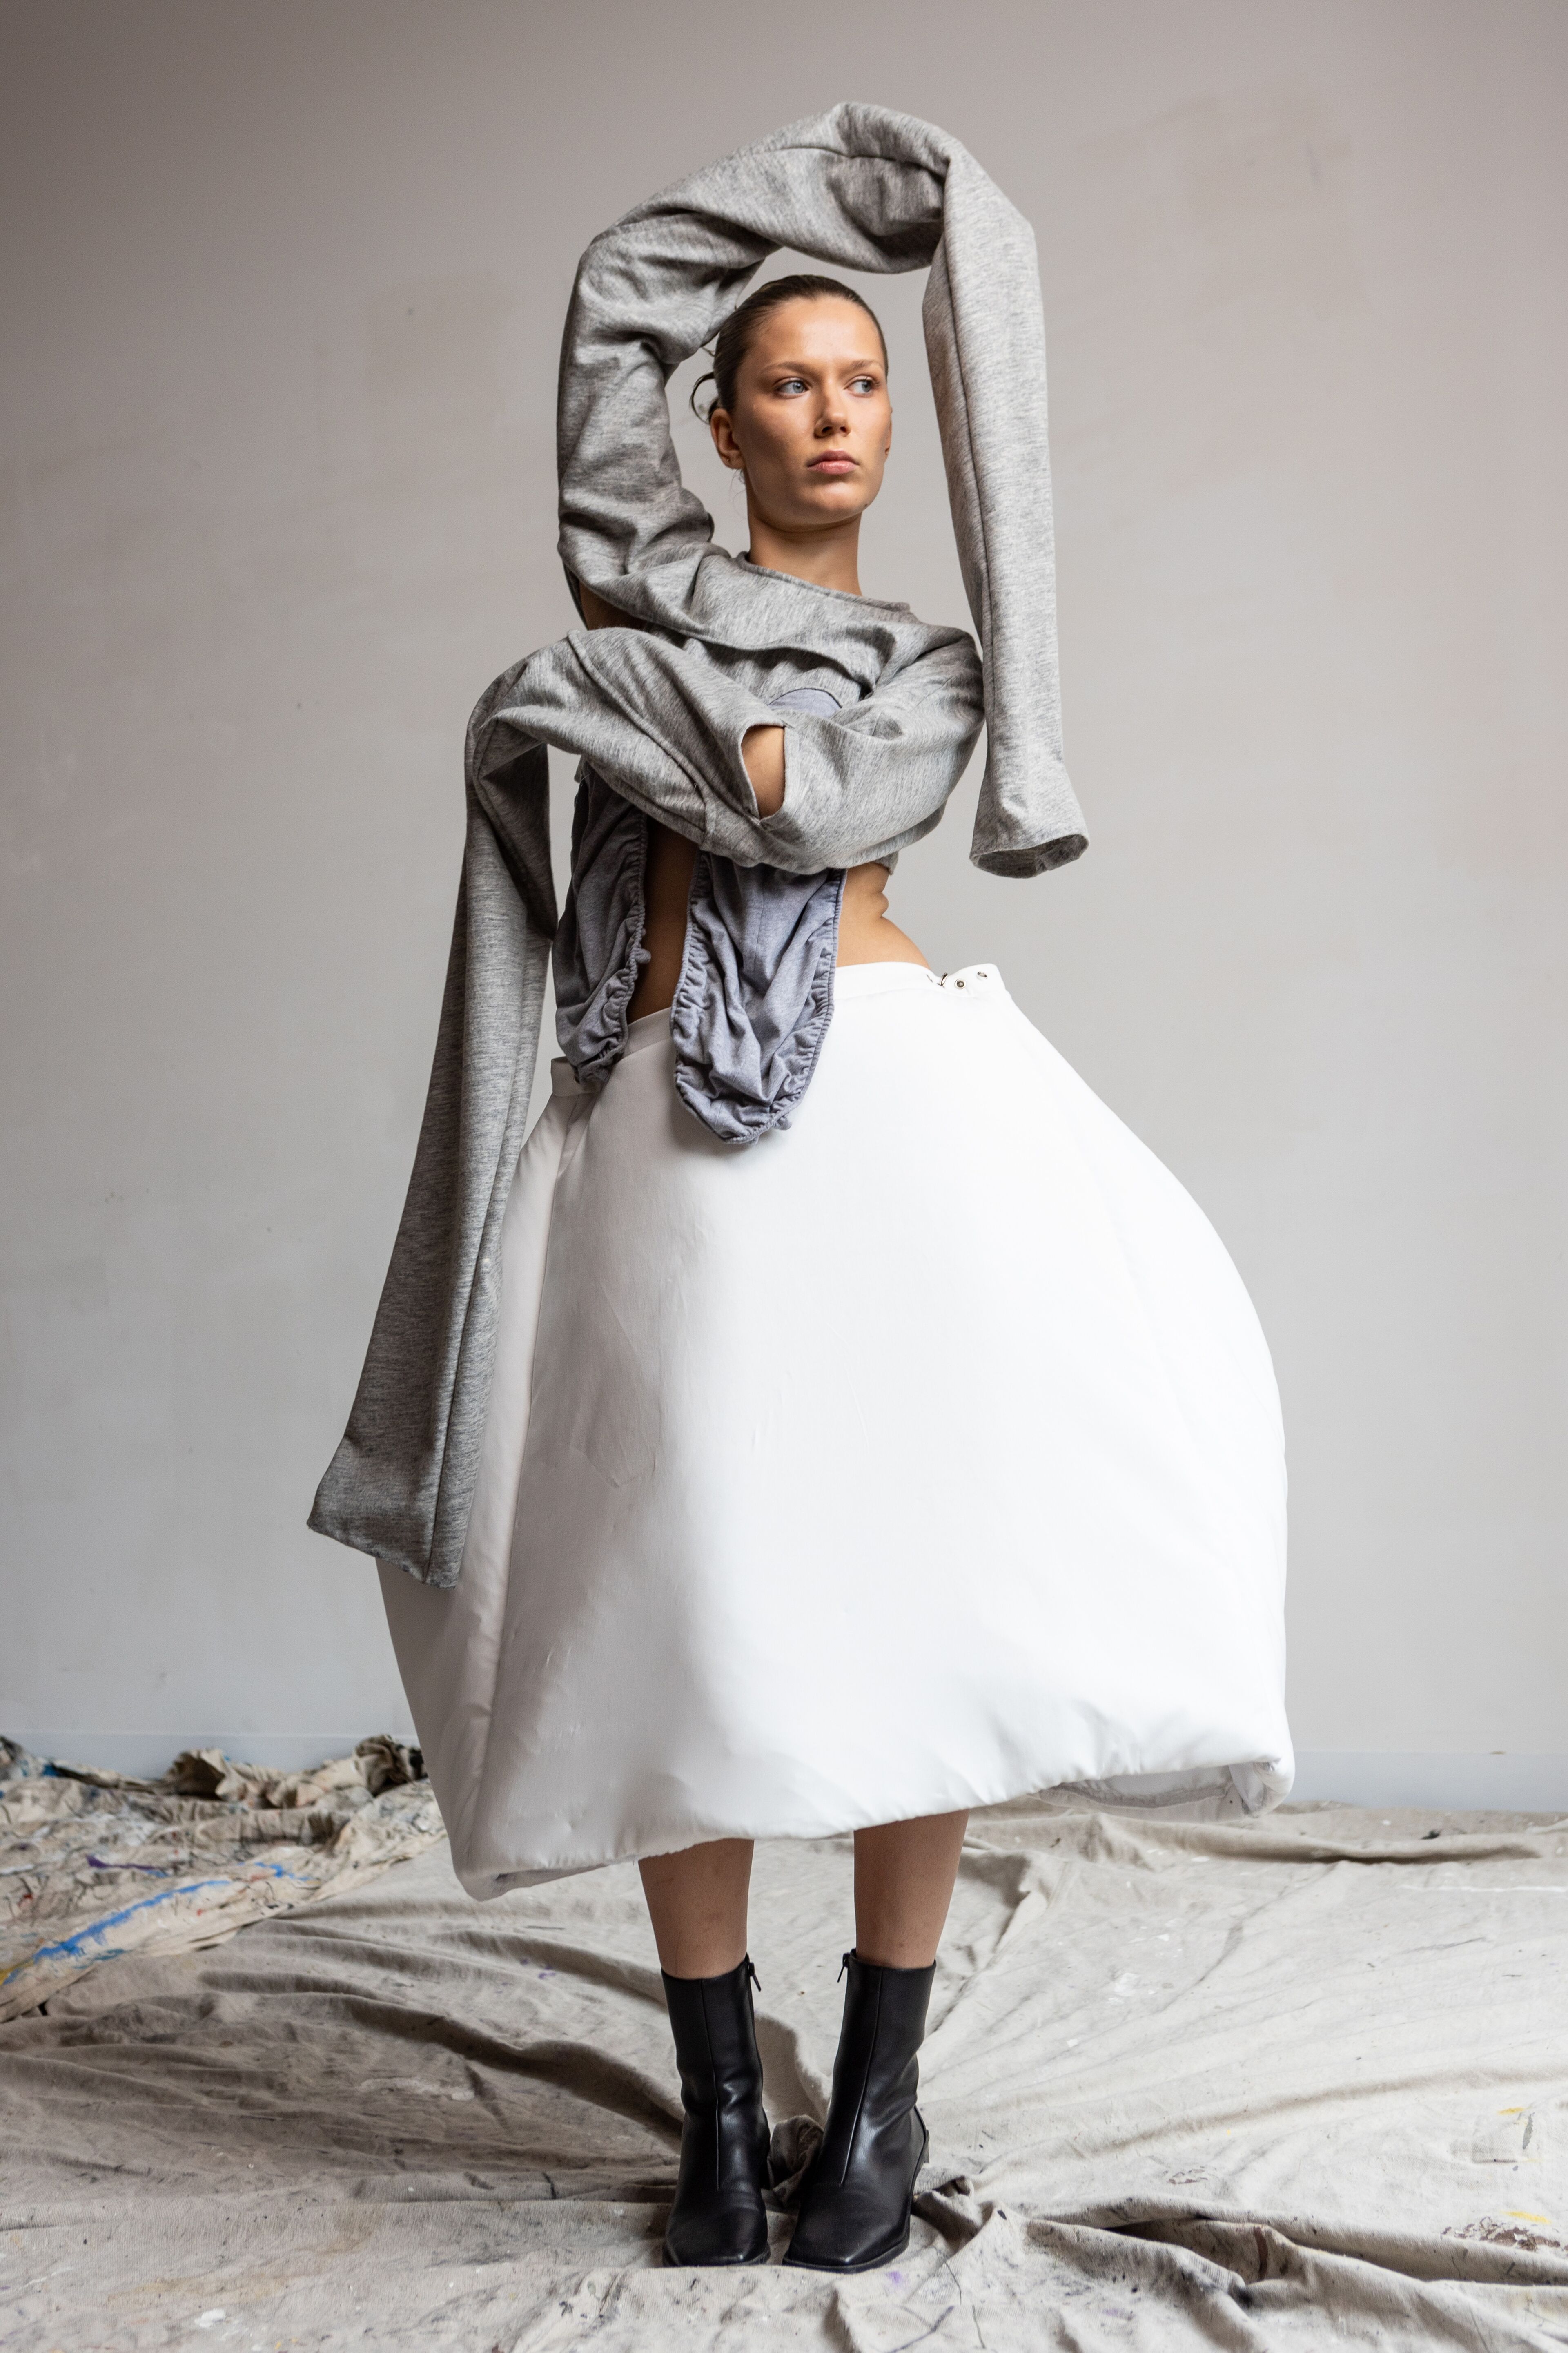 A bold fashion statement is captured in this image where a model stands in a striking pose, a voluminous white skirt ballooning around her, contrasted with a textured grey top that wraps around her arms.